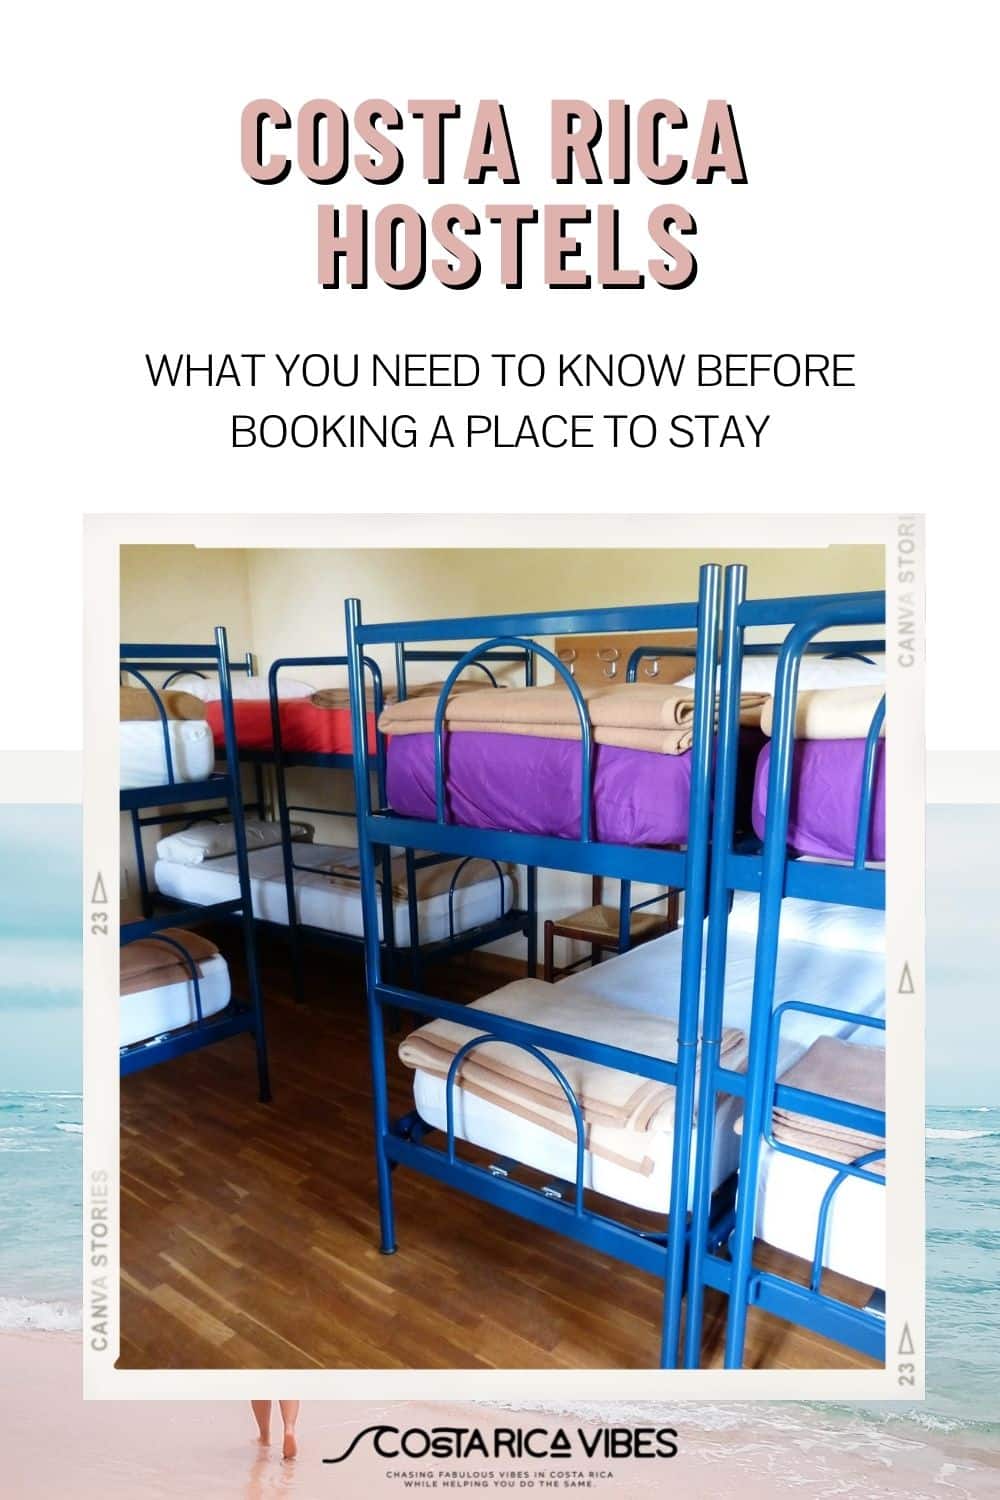 Costa Rica Hostels - Read This Before Booking a Place